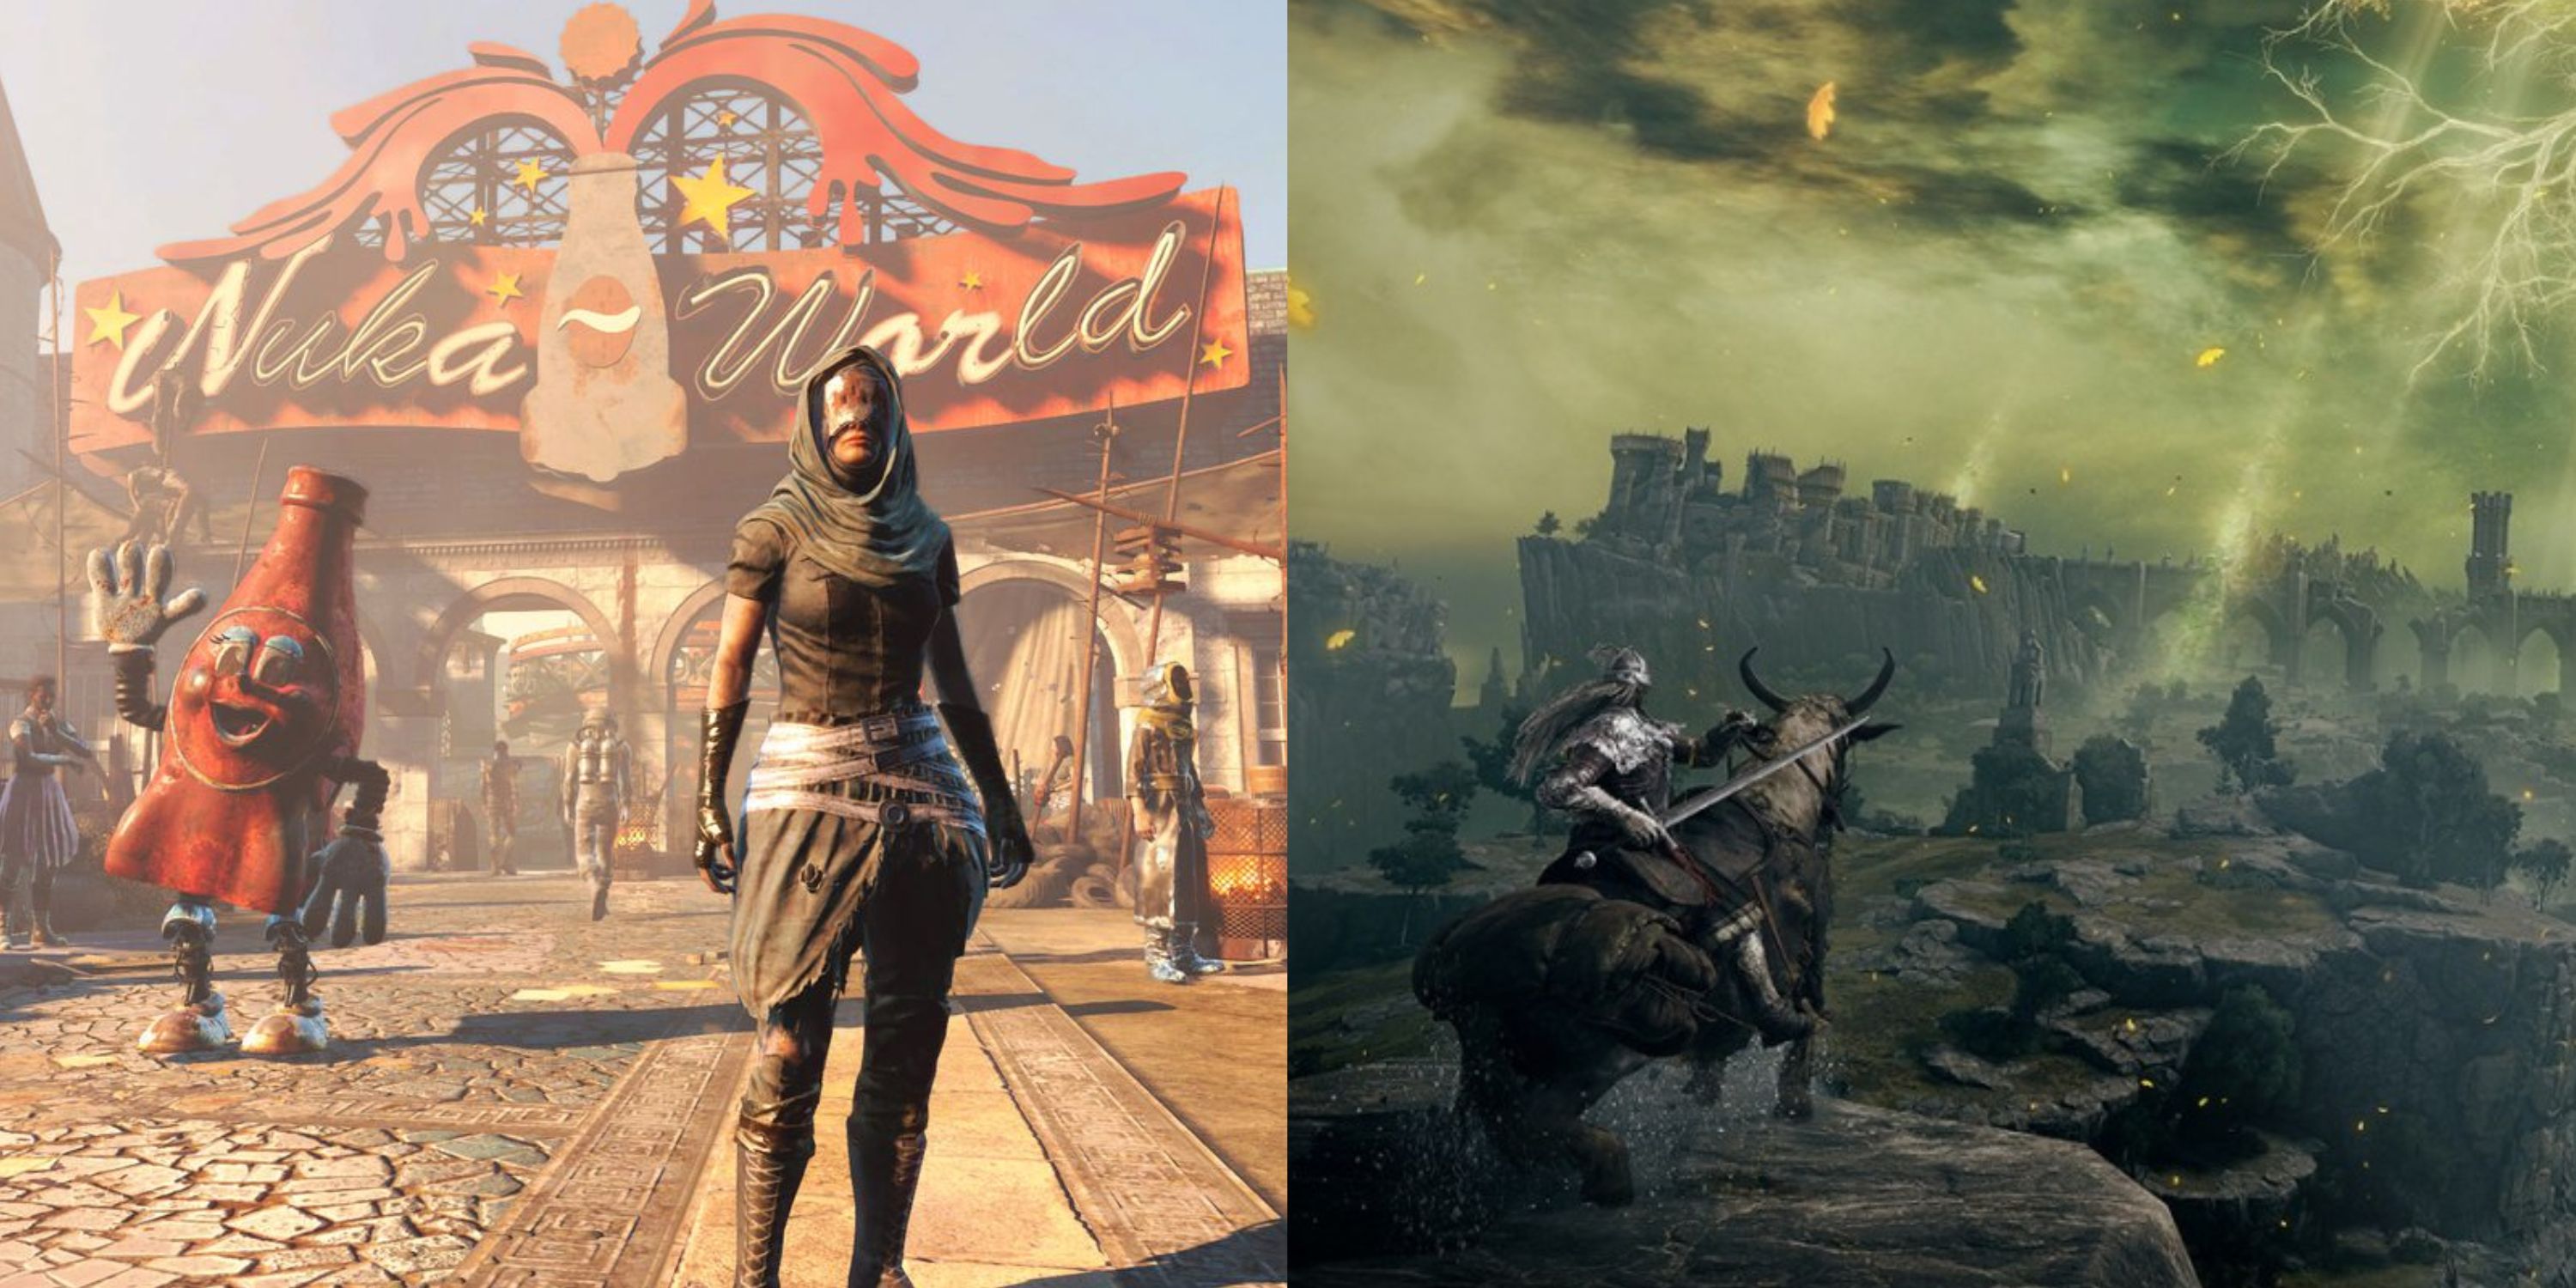 A wanderer standing in front of Fallout 4's Nuka-World DLC area (L) and a Tarnished atop their steed, Torrent, overlooking Elden Ring's Lands Between (R)